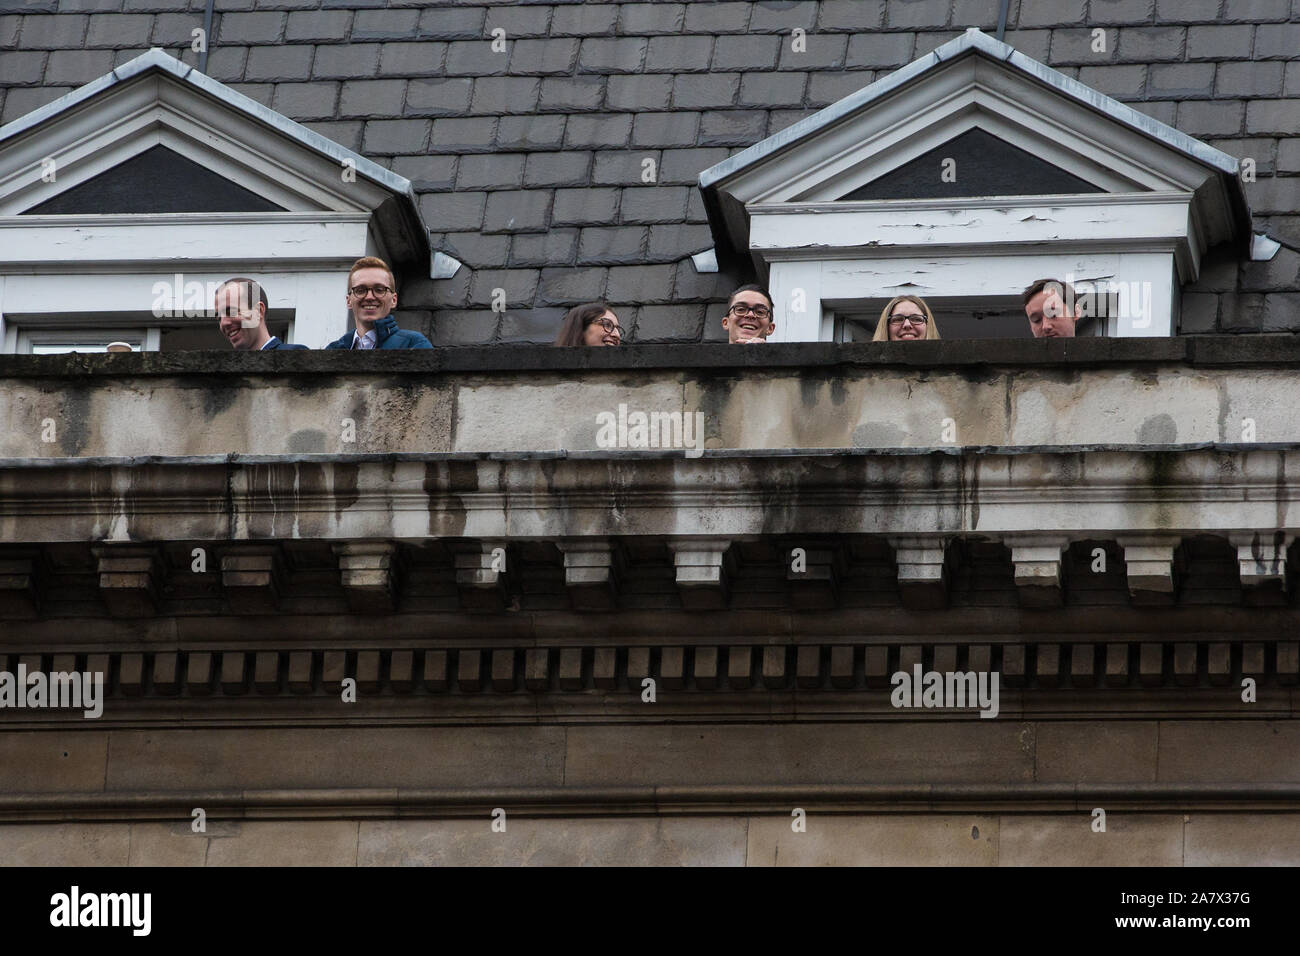 London, UK. 14 October, 2019. Office workers watch from a rooftop high above Parliament Street shortly before the arrival of the Queen en route to the Stock Photo